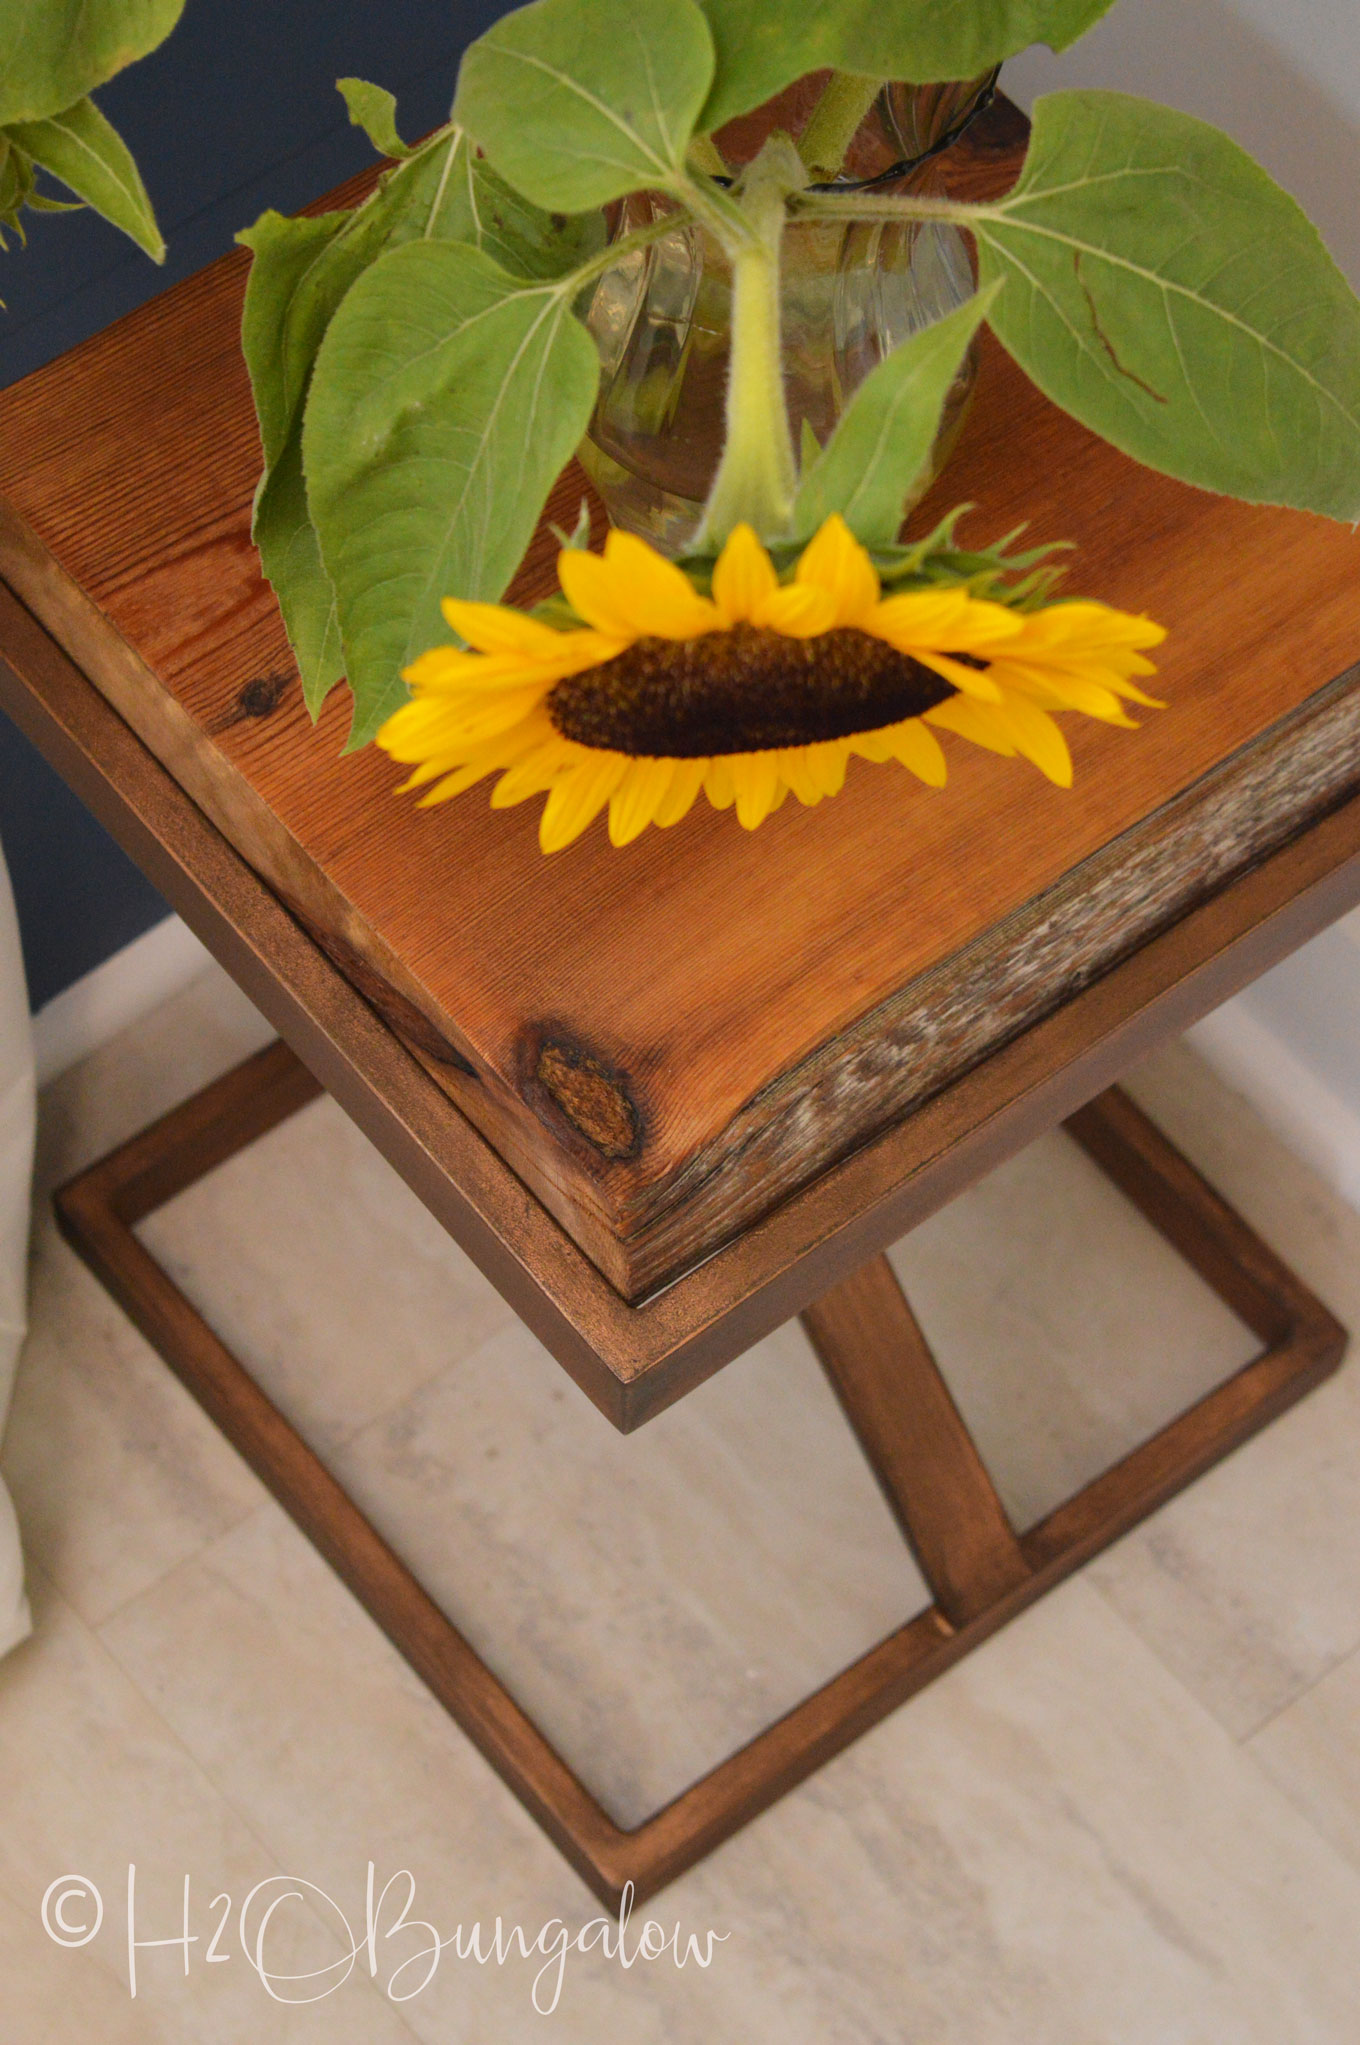 DIY tutorial to make a repurposed metal and wood side table from an old gold glass table into a wood and metal contemporary or rustic side table.